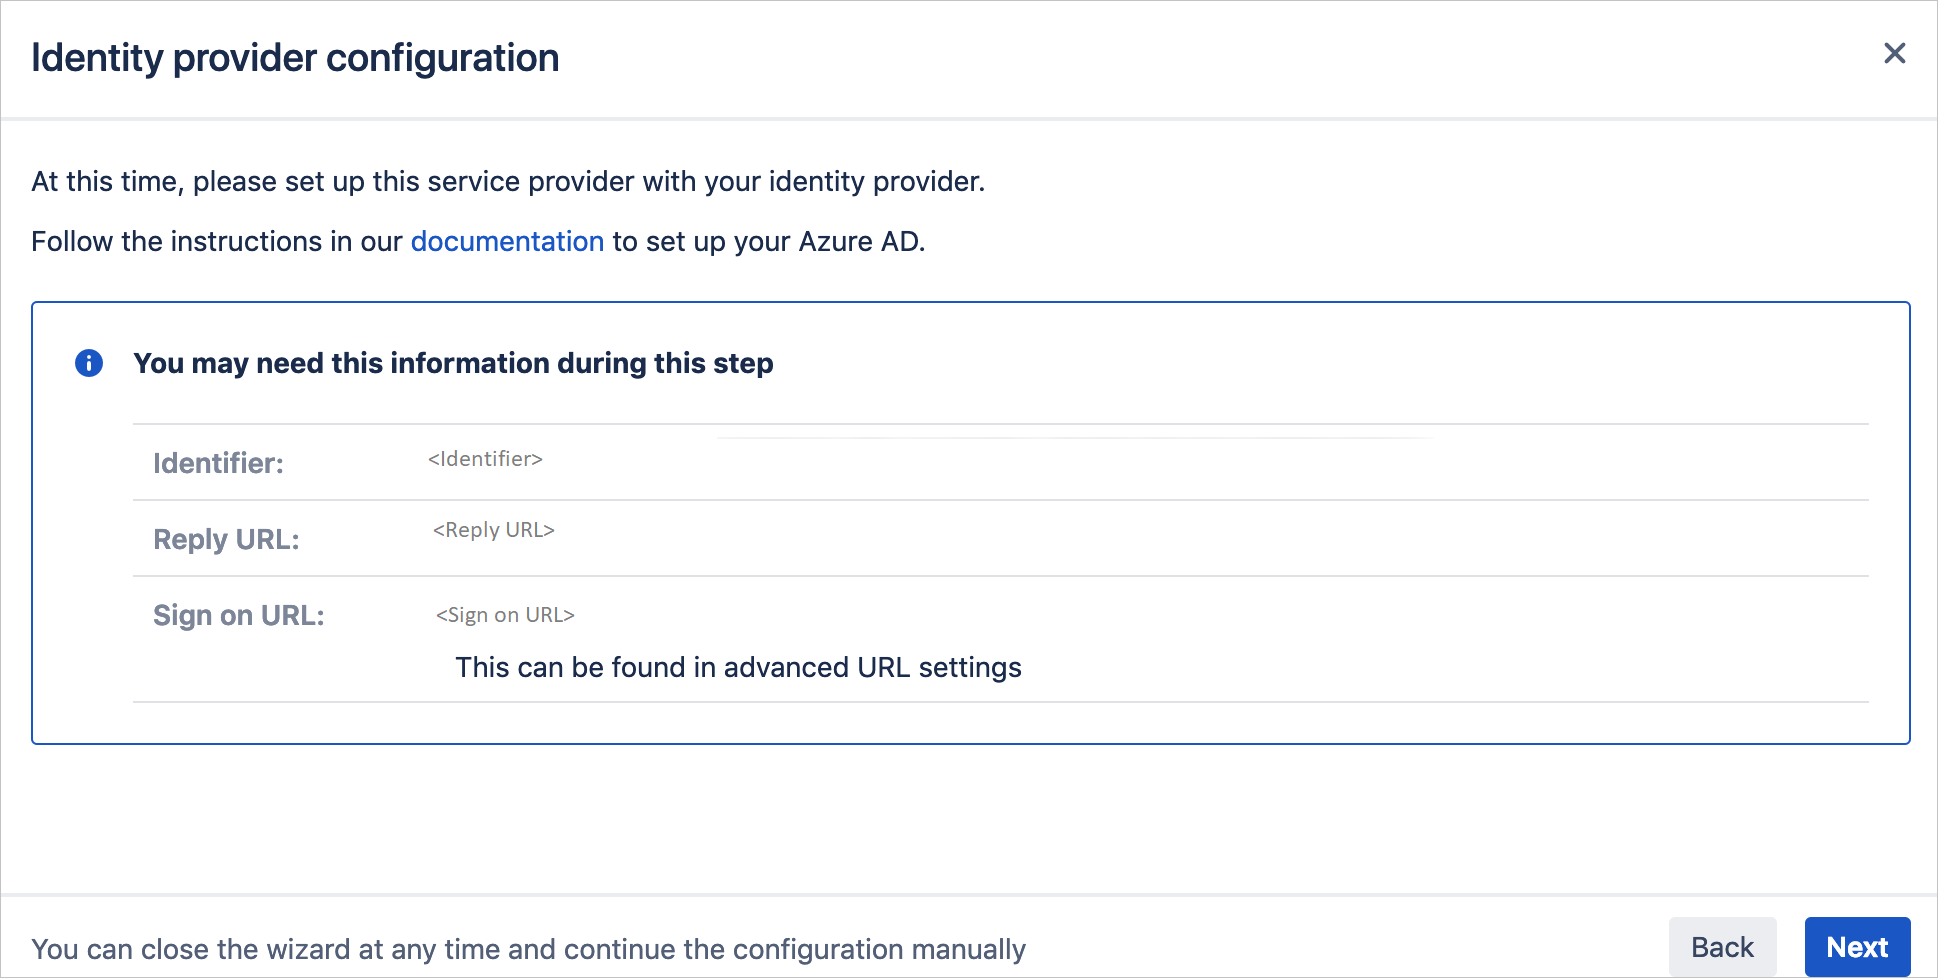 Screenshot that shows the "Identity provider configuration" page.